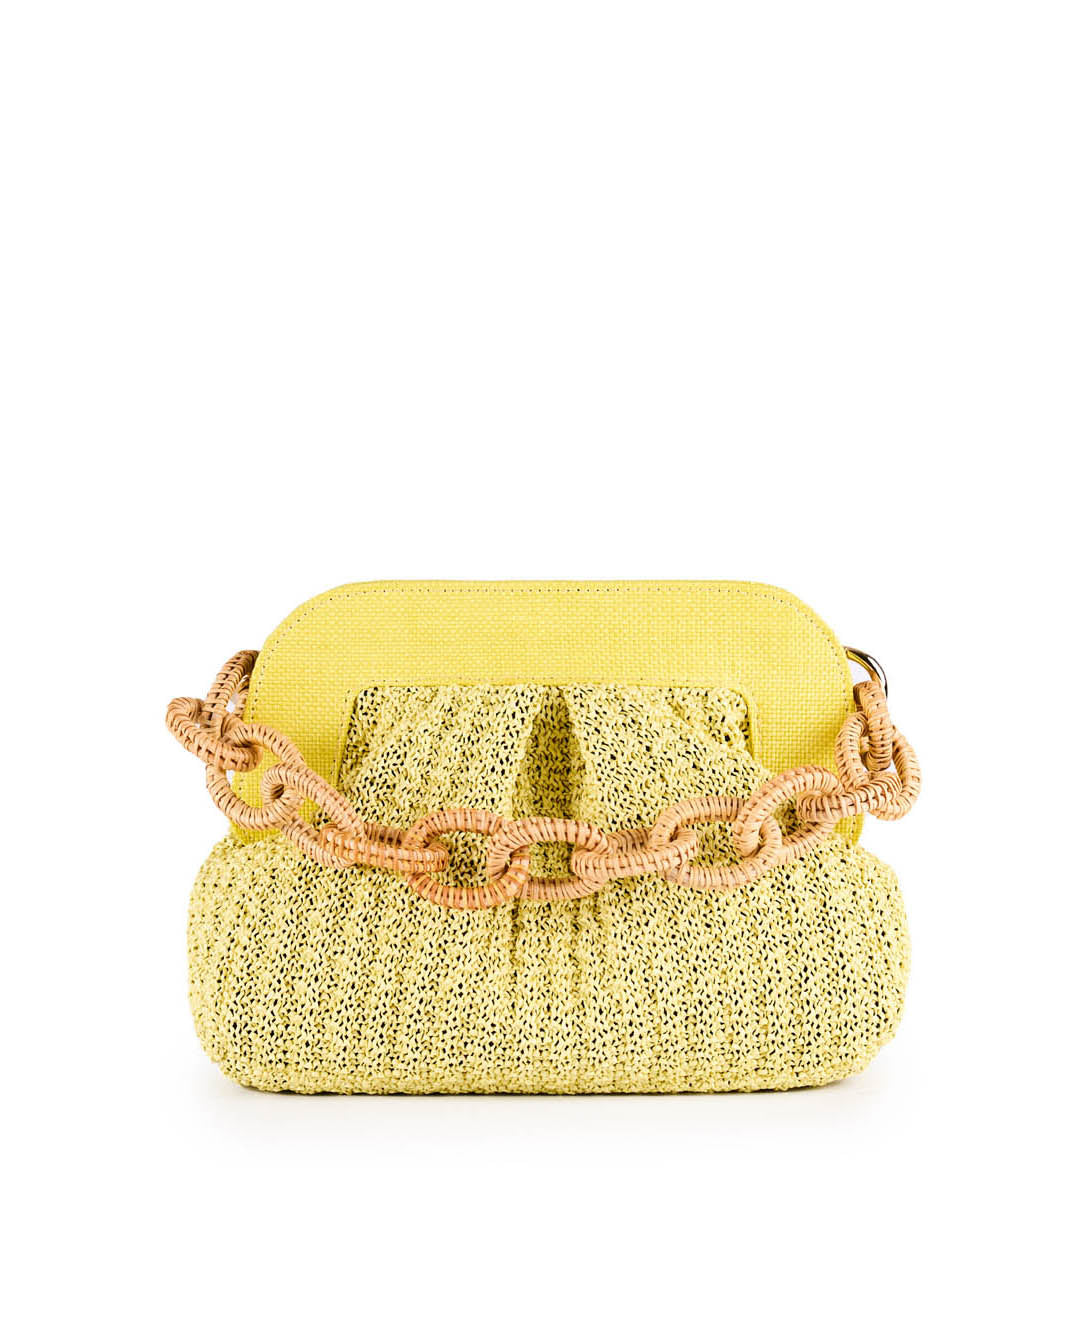 Yellow woven handbag with a large brown chain strap on a white background